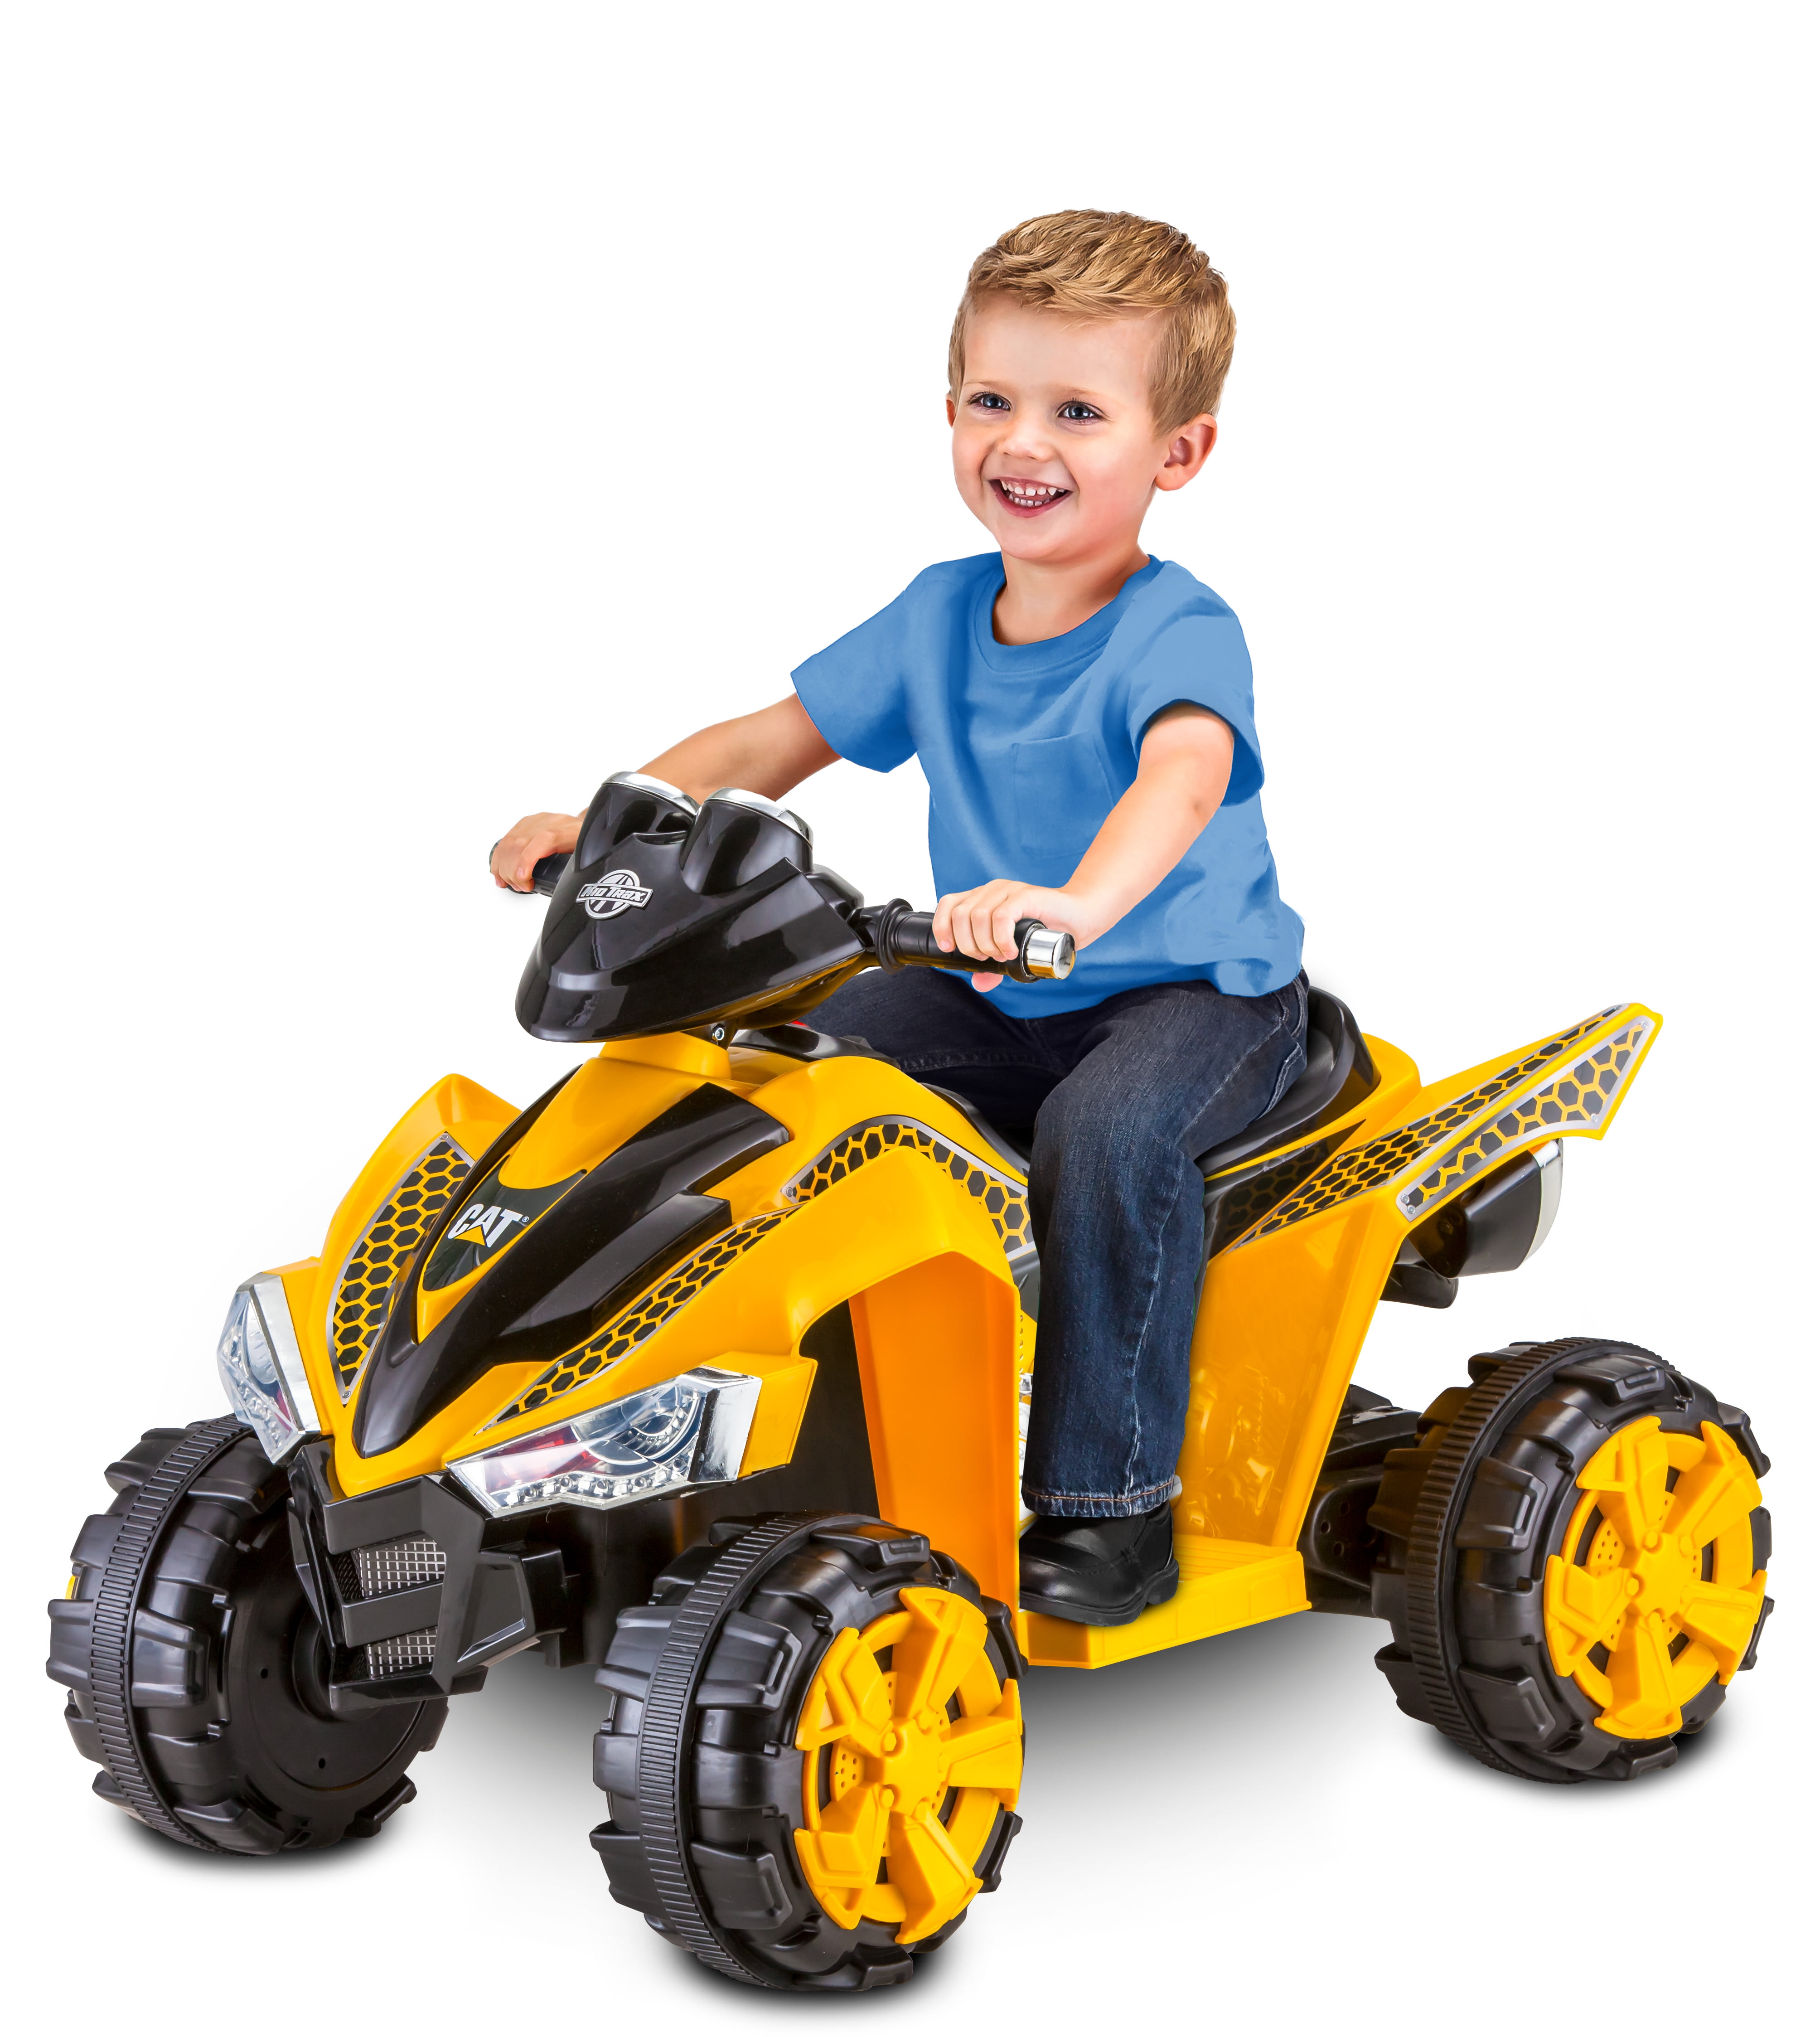 Kid Trax Cat 6v Quad Ride on 038675115309 for sale online 